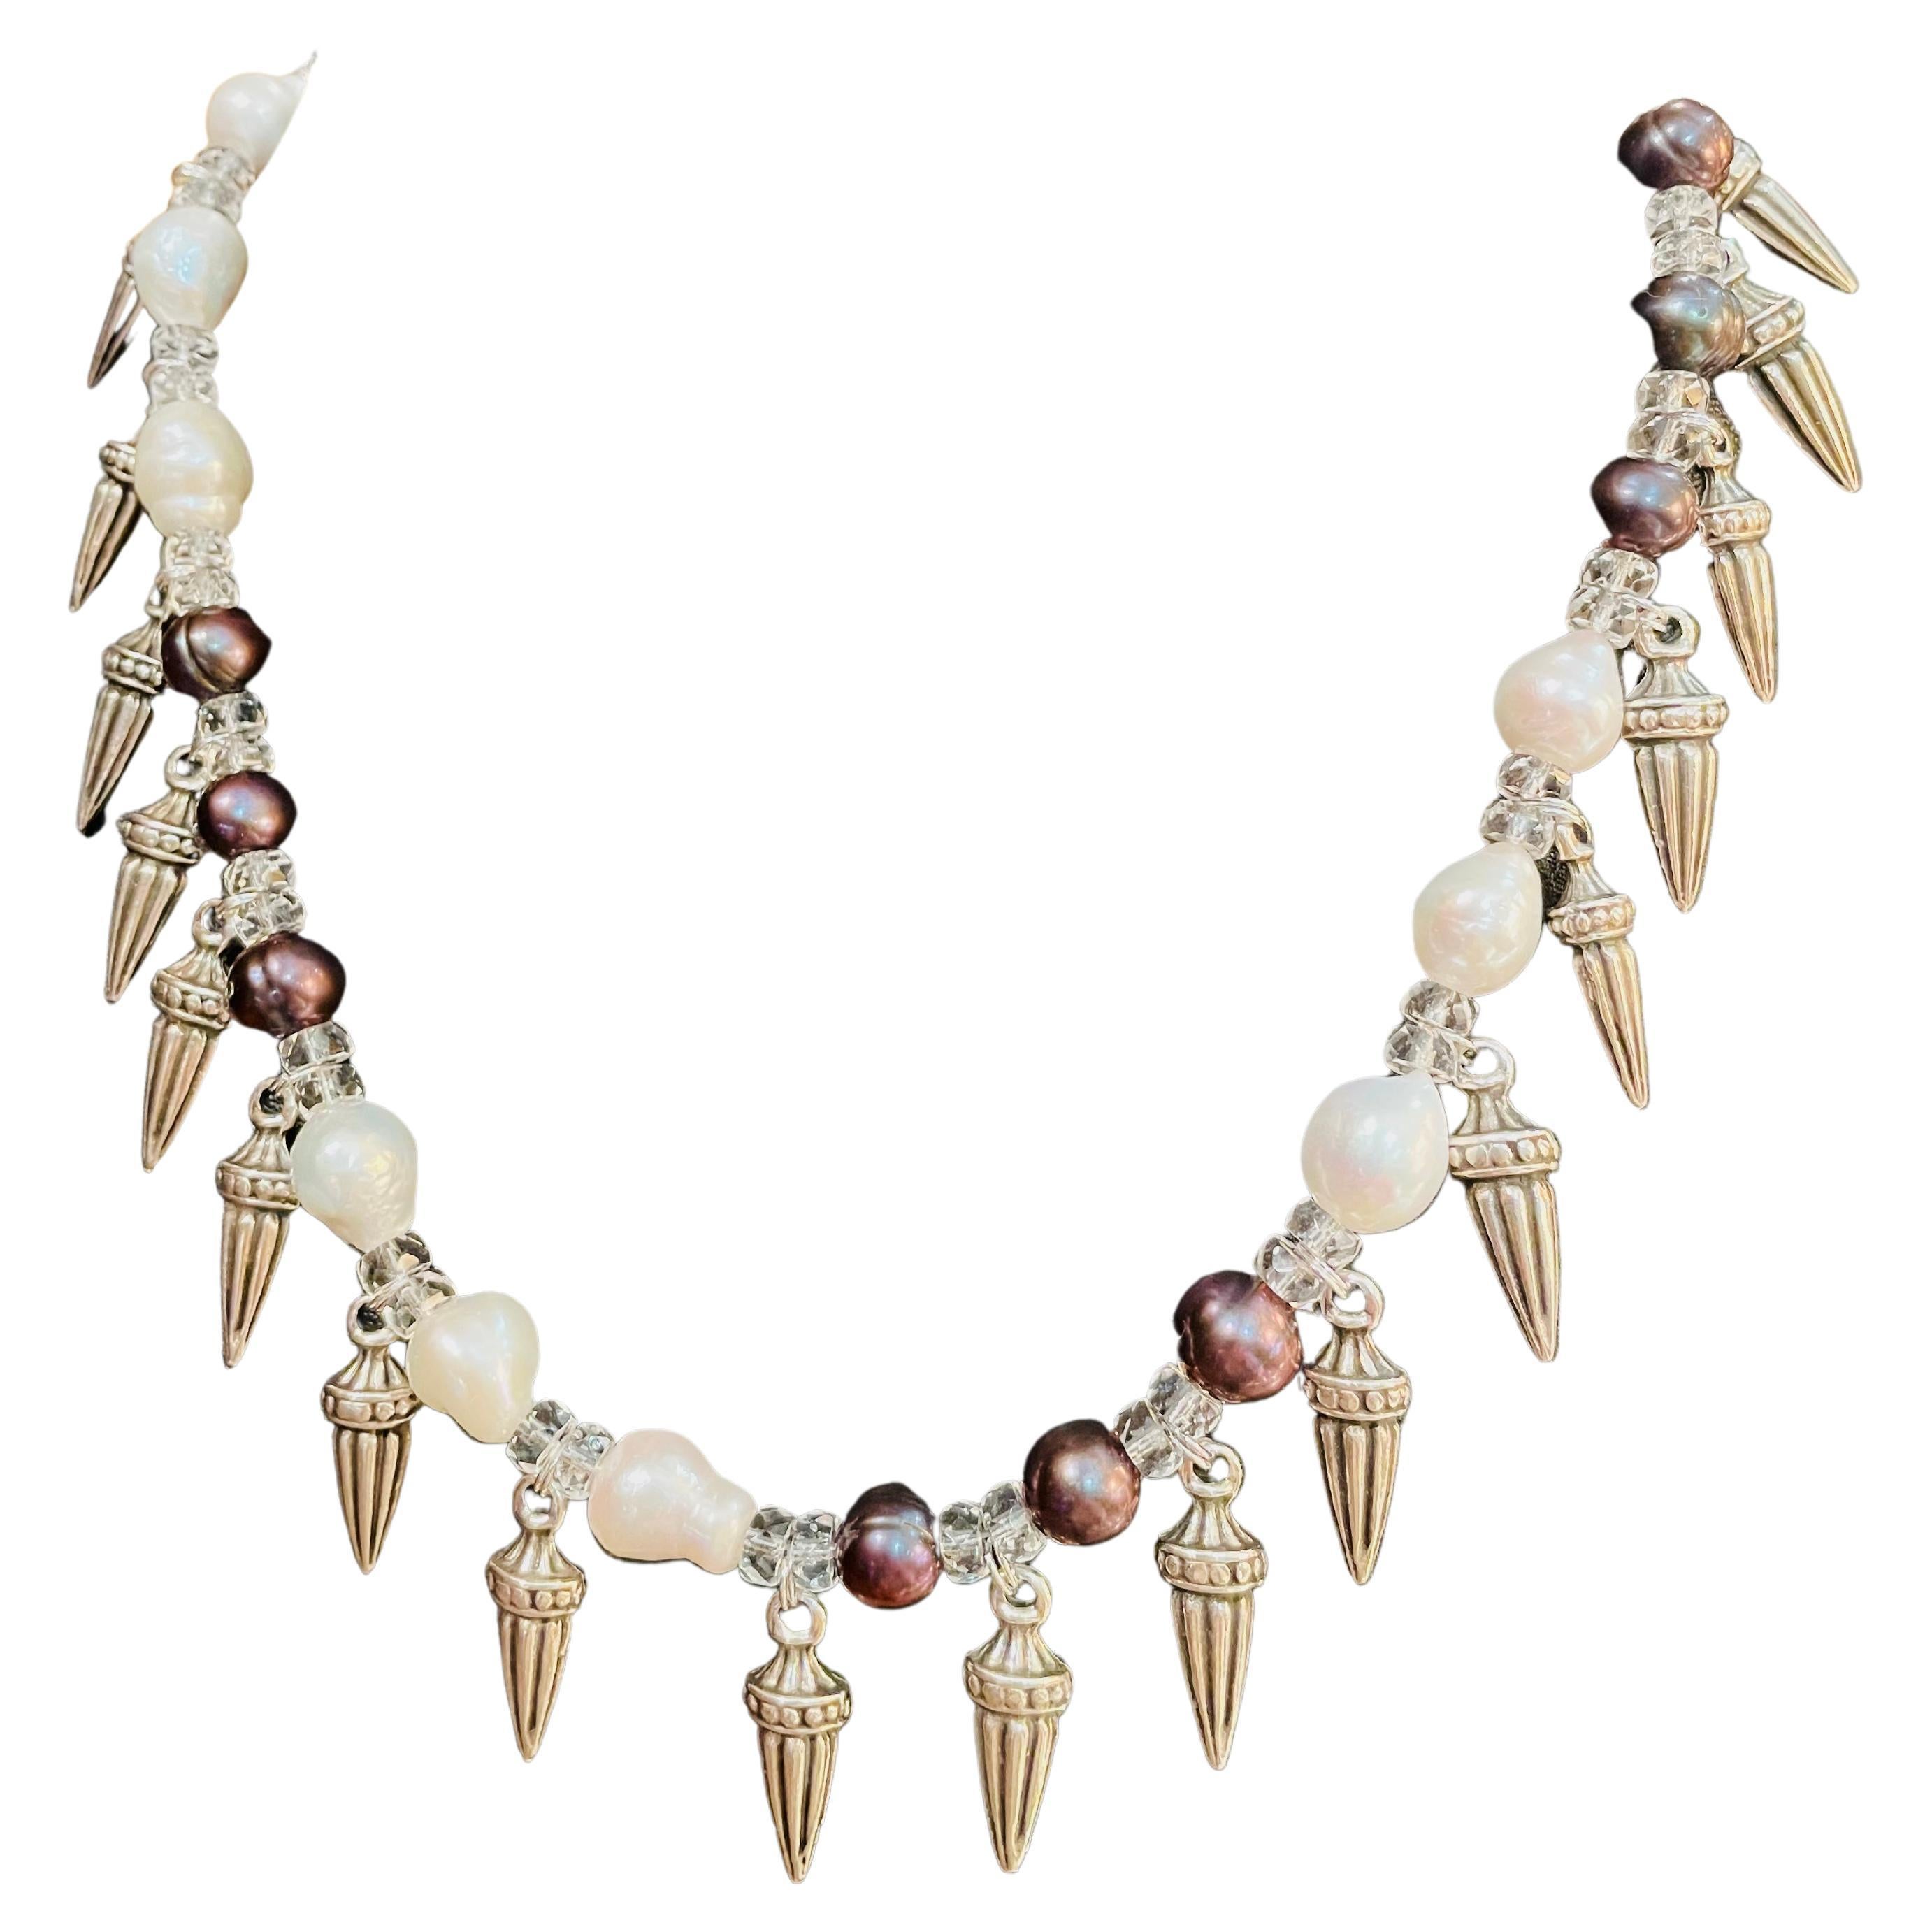 Spikes and pearls in a handmade, one of a kind.necklace from Lorraine’s Bijoux.] For Sale